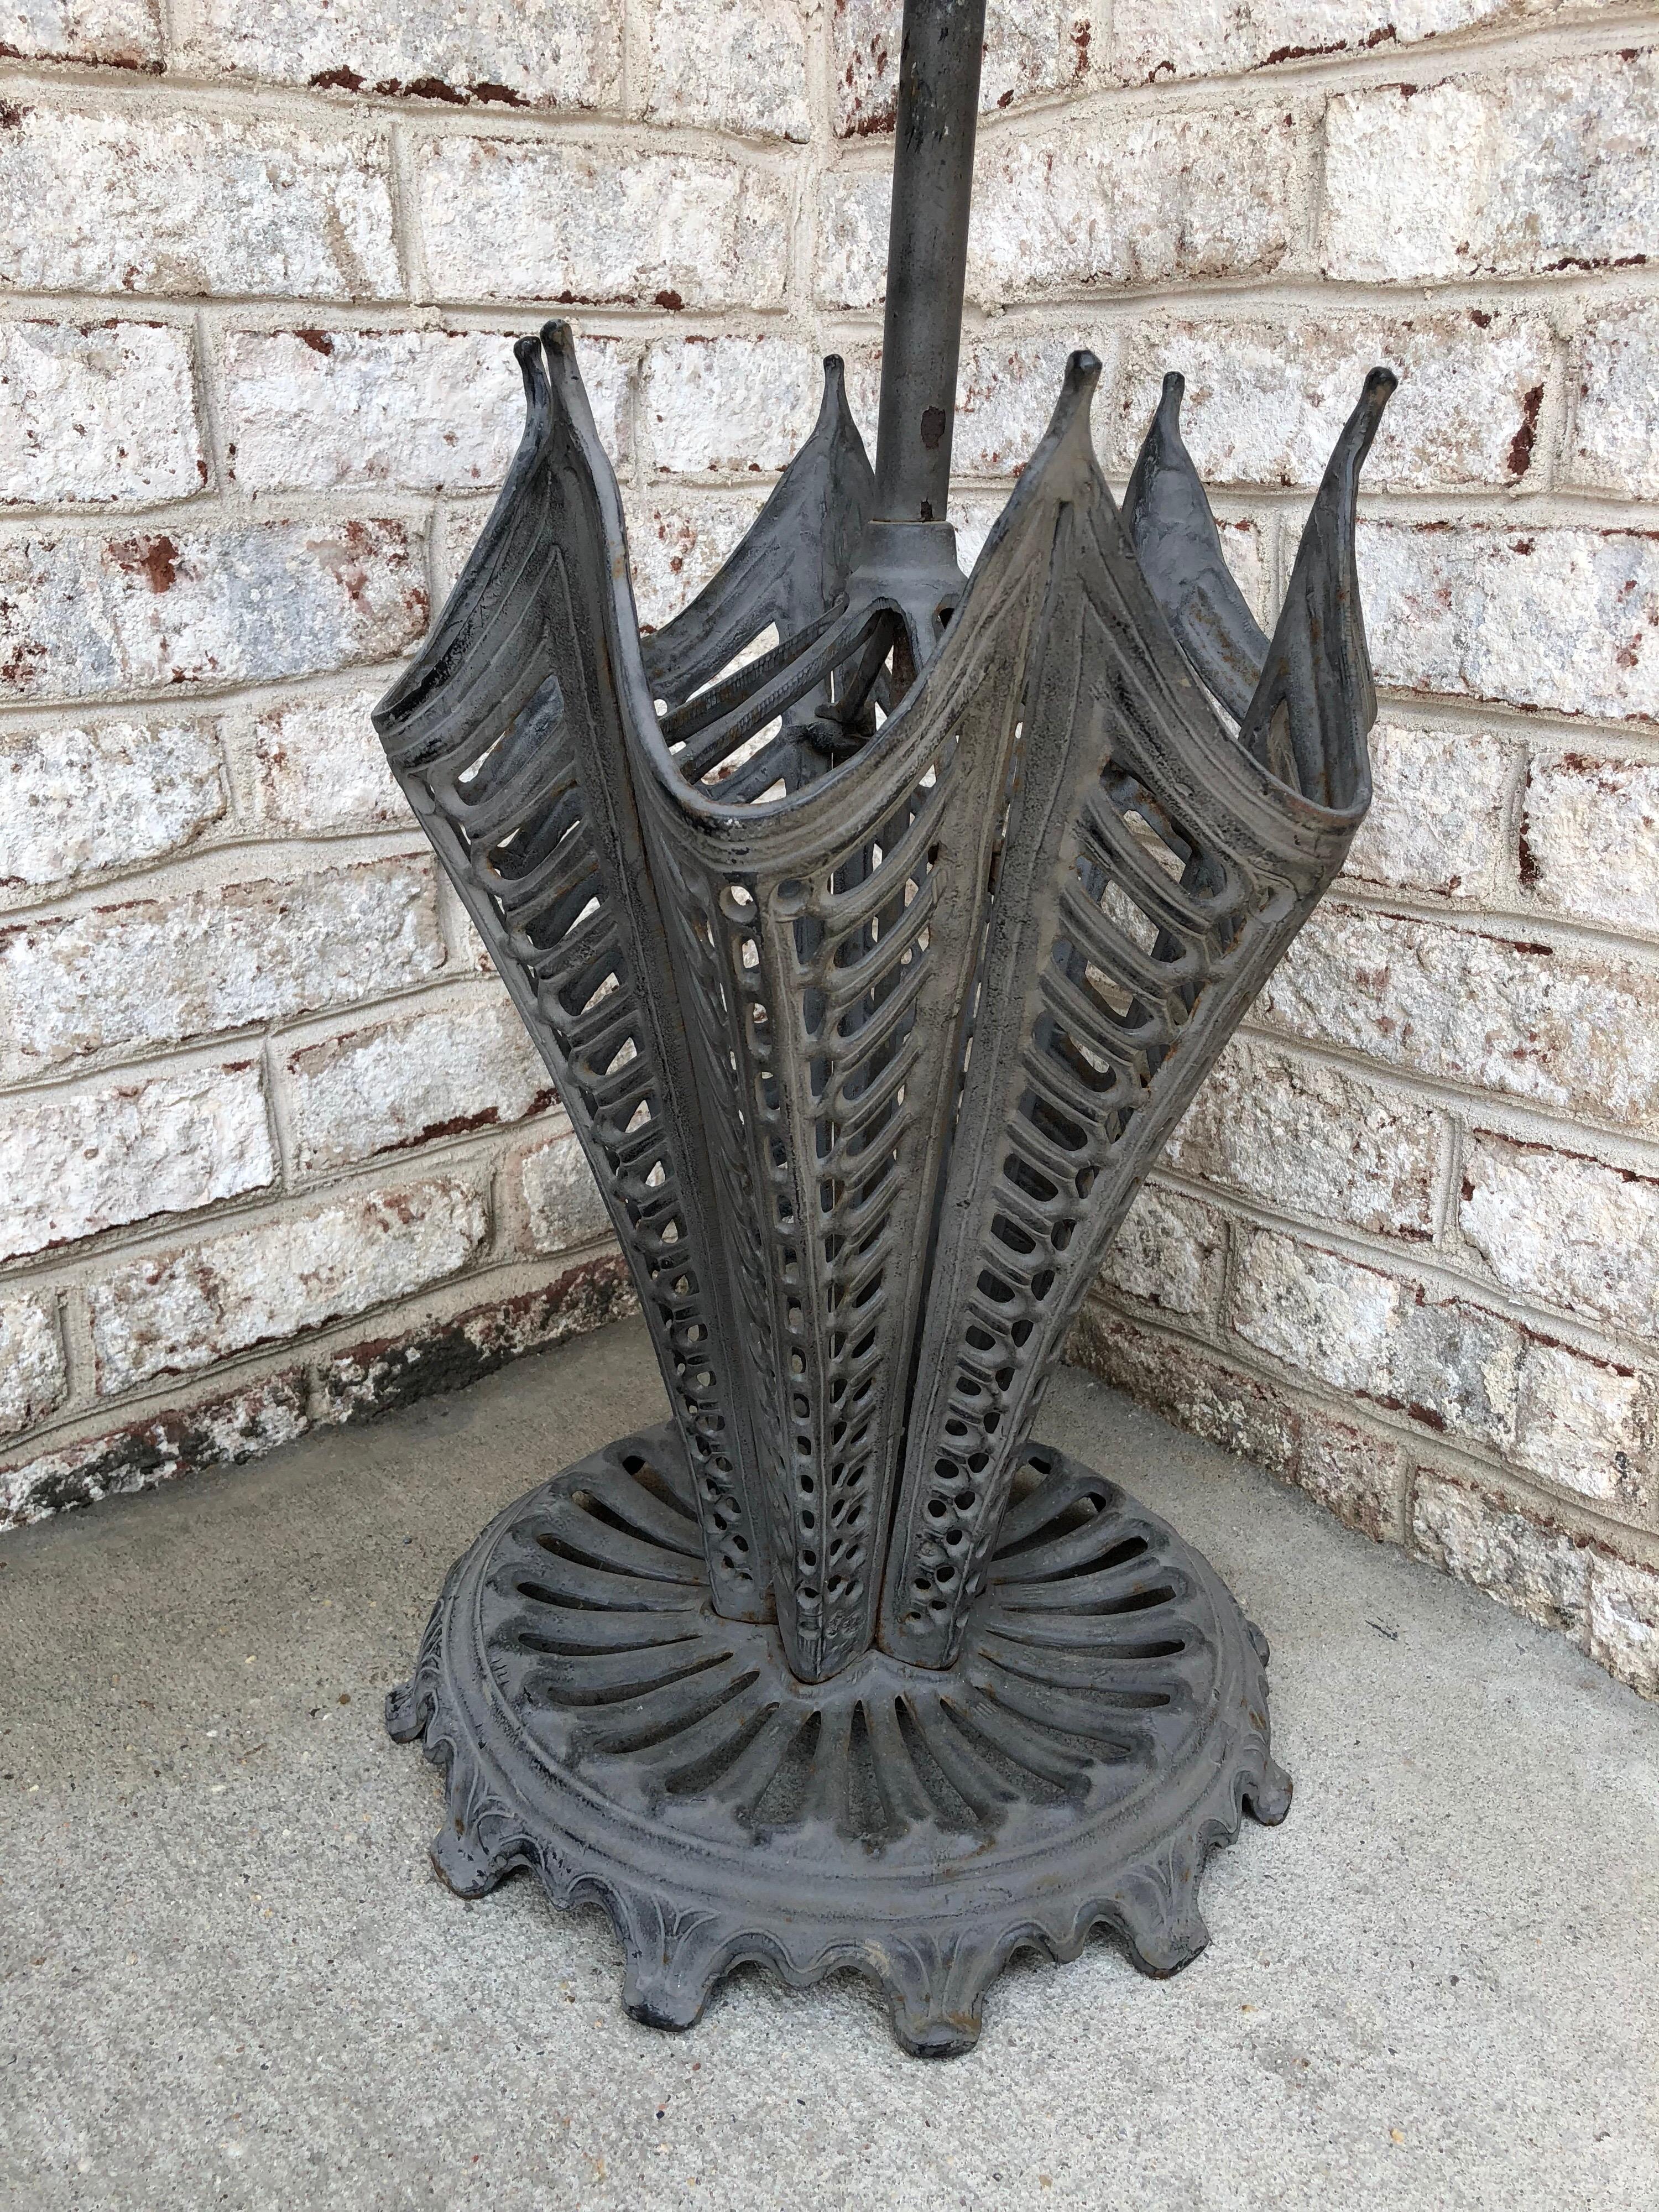 Made in England of cast iron ‘circa 1900s’, this very heavy umbrella stand is in original condition. Rare and whimsical with clutched hand to top, over the top cut out umbrella shape.